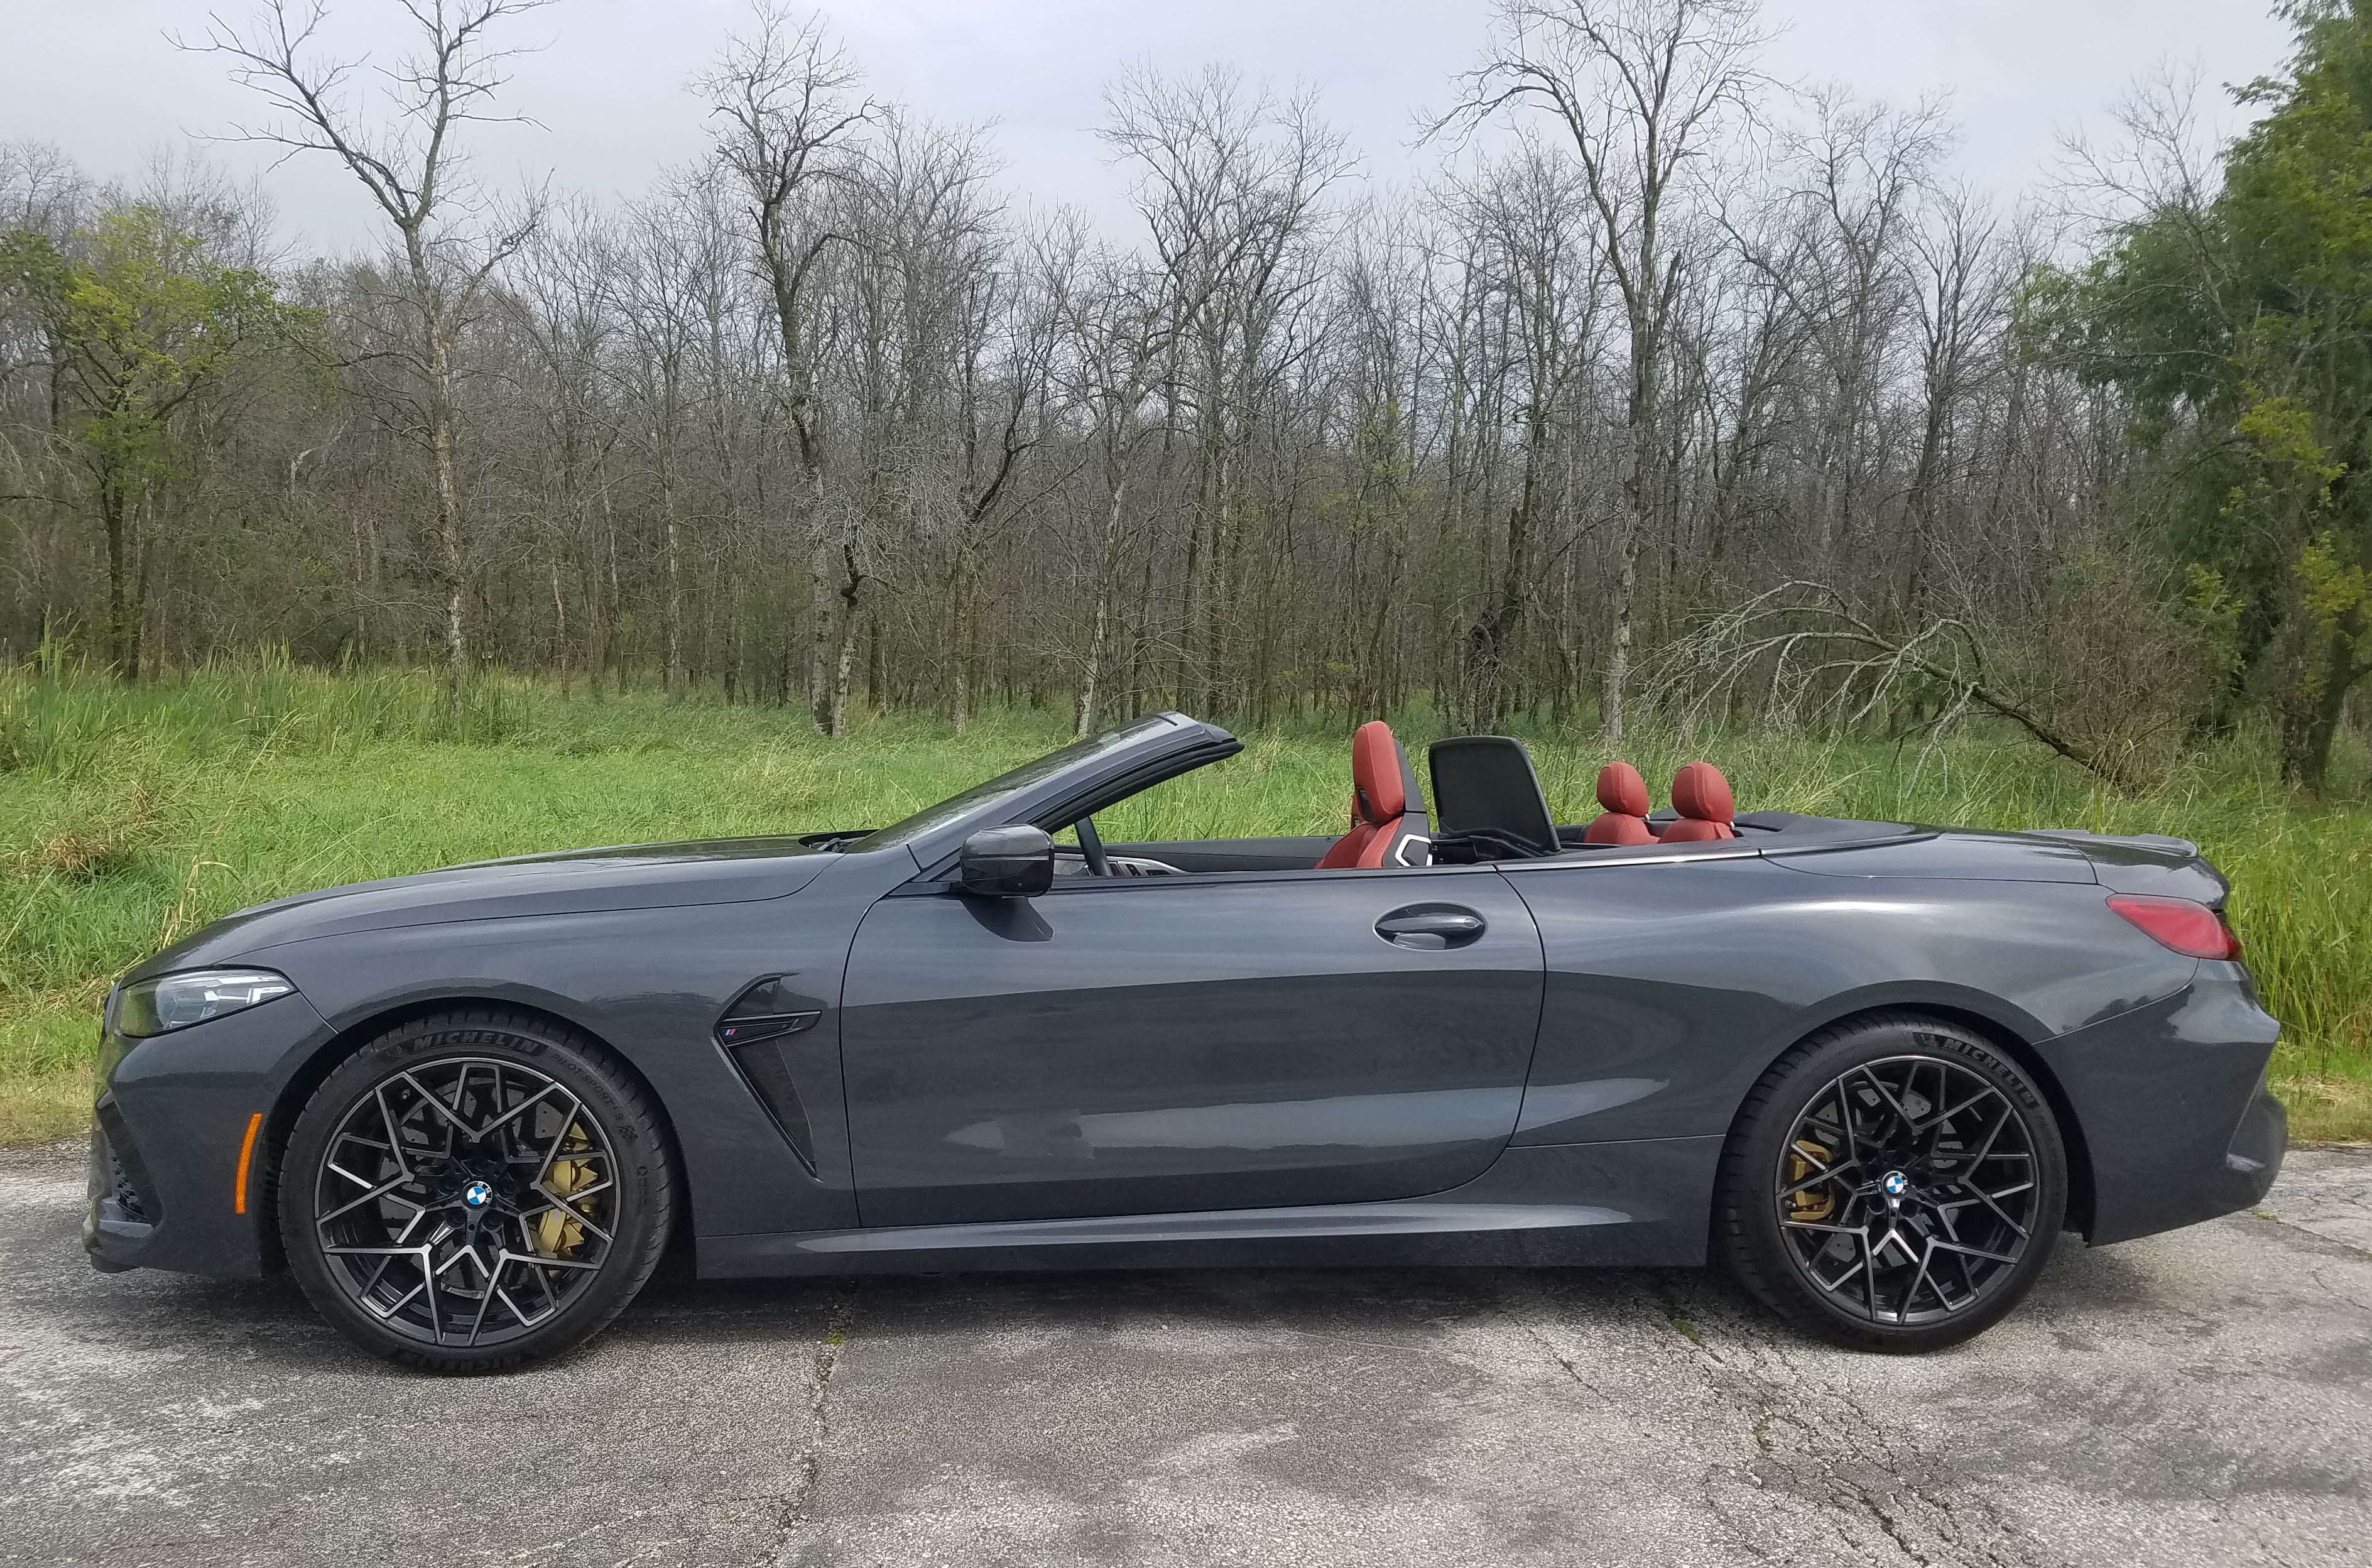 2020 BMW M8 Competition Convertible Review | WUWM 89.7 FM - Milwaukee's NPR